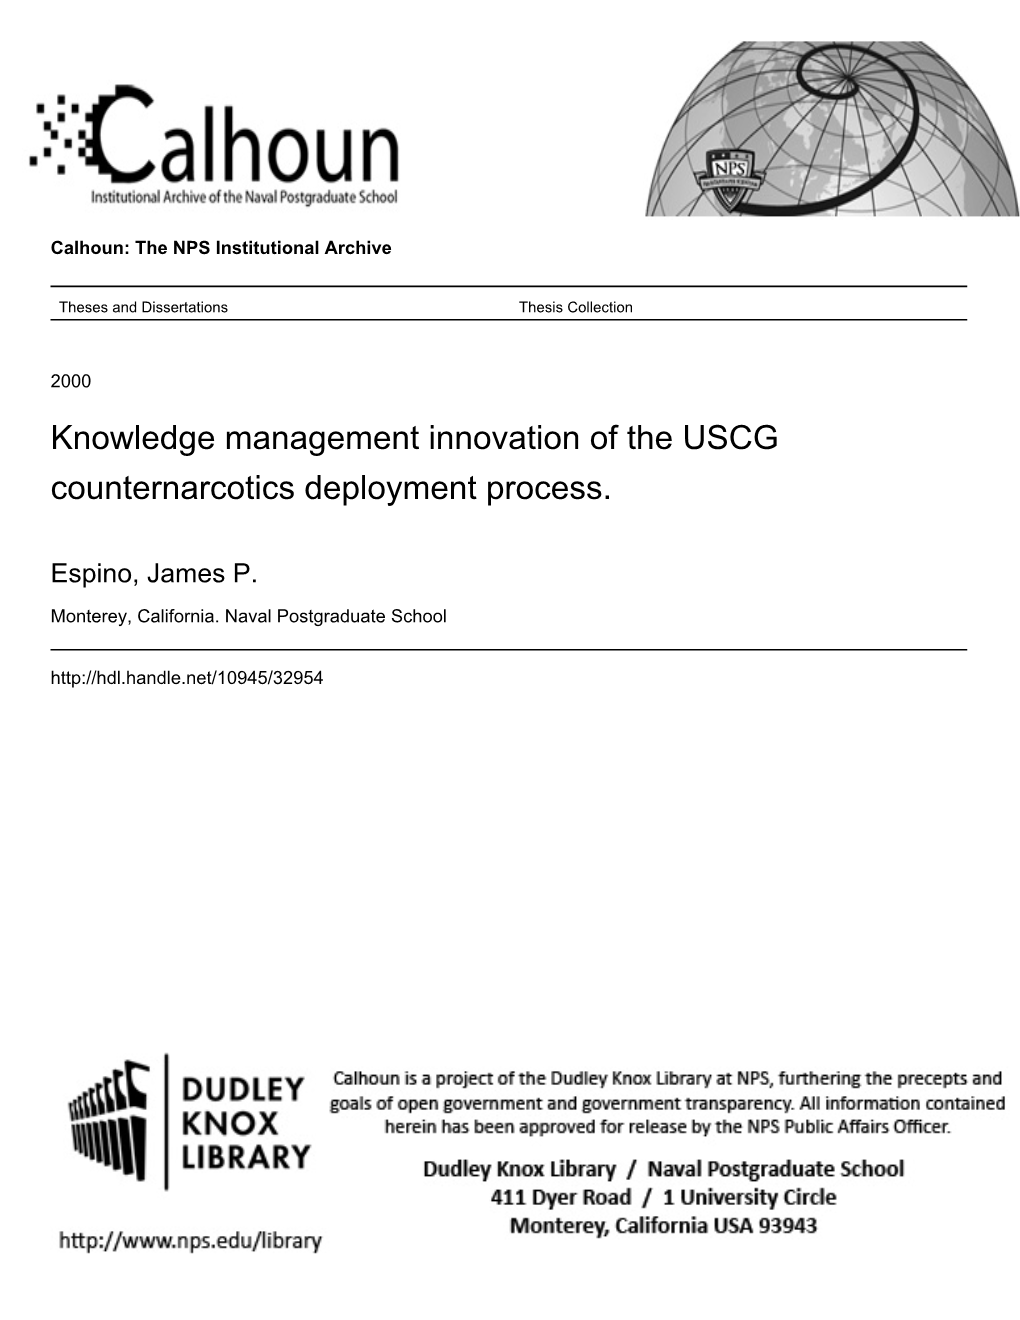 Knowledge Management Innovation of the USCG Counternarcotics Deployment Process